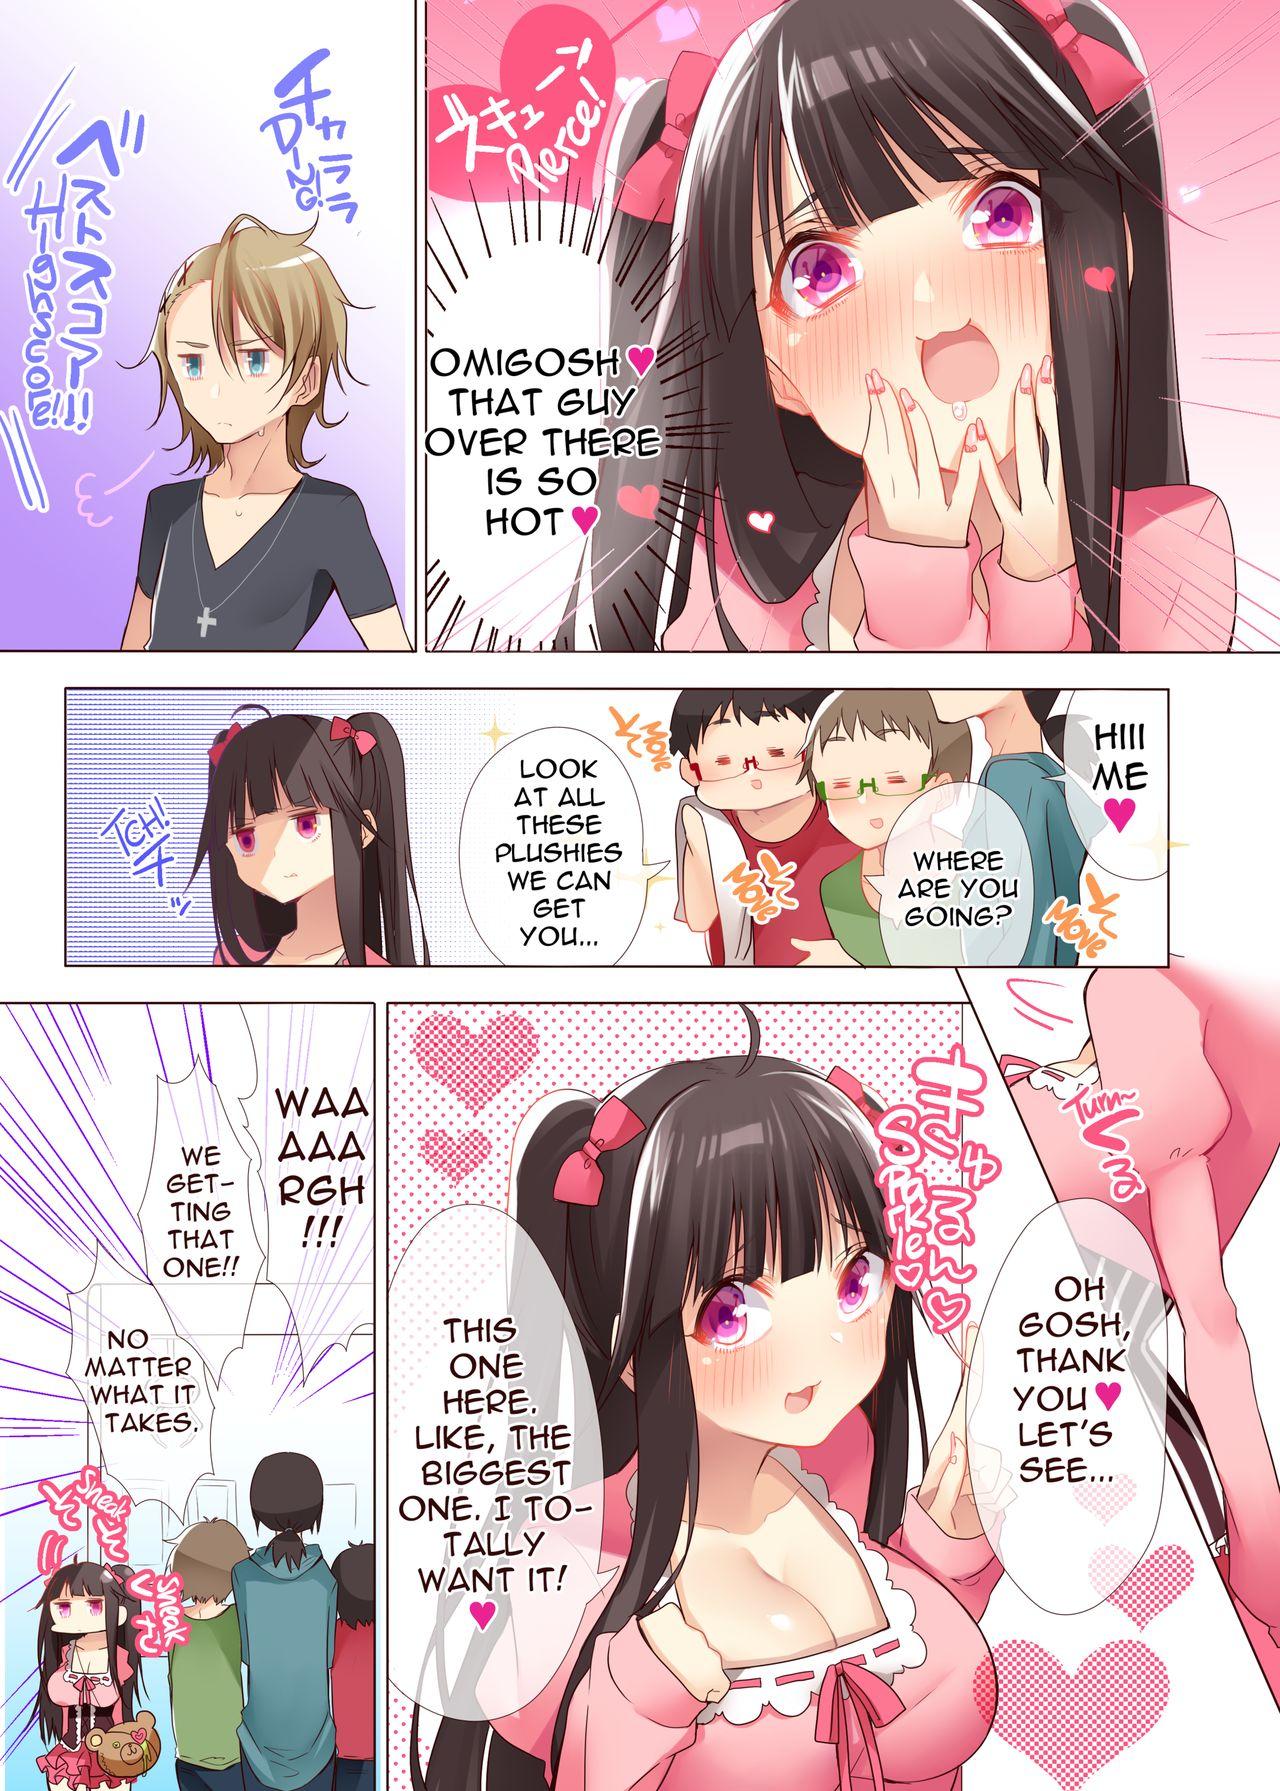 8teen The Princess of an Otaku Group Got Knocked Up by Some Piece of Trash So She Let an Otaku Guy Do Her Too!? - Original Gay Friend - Page 4